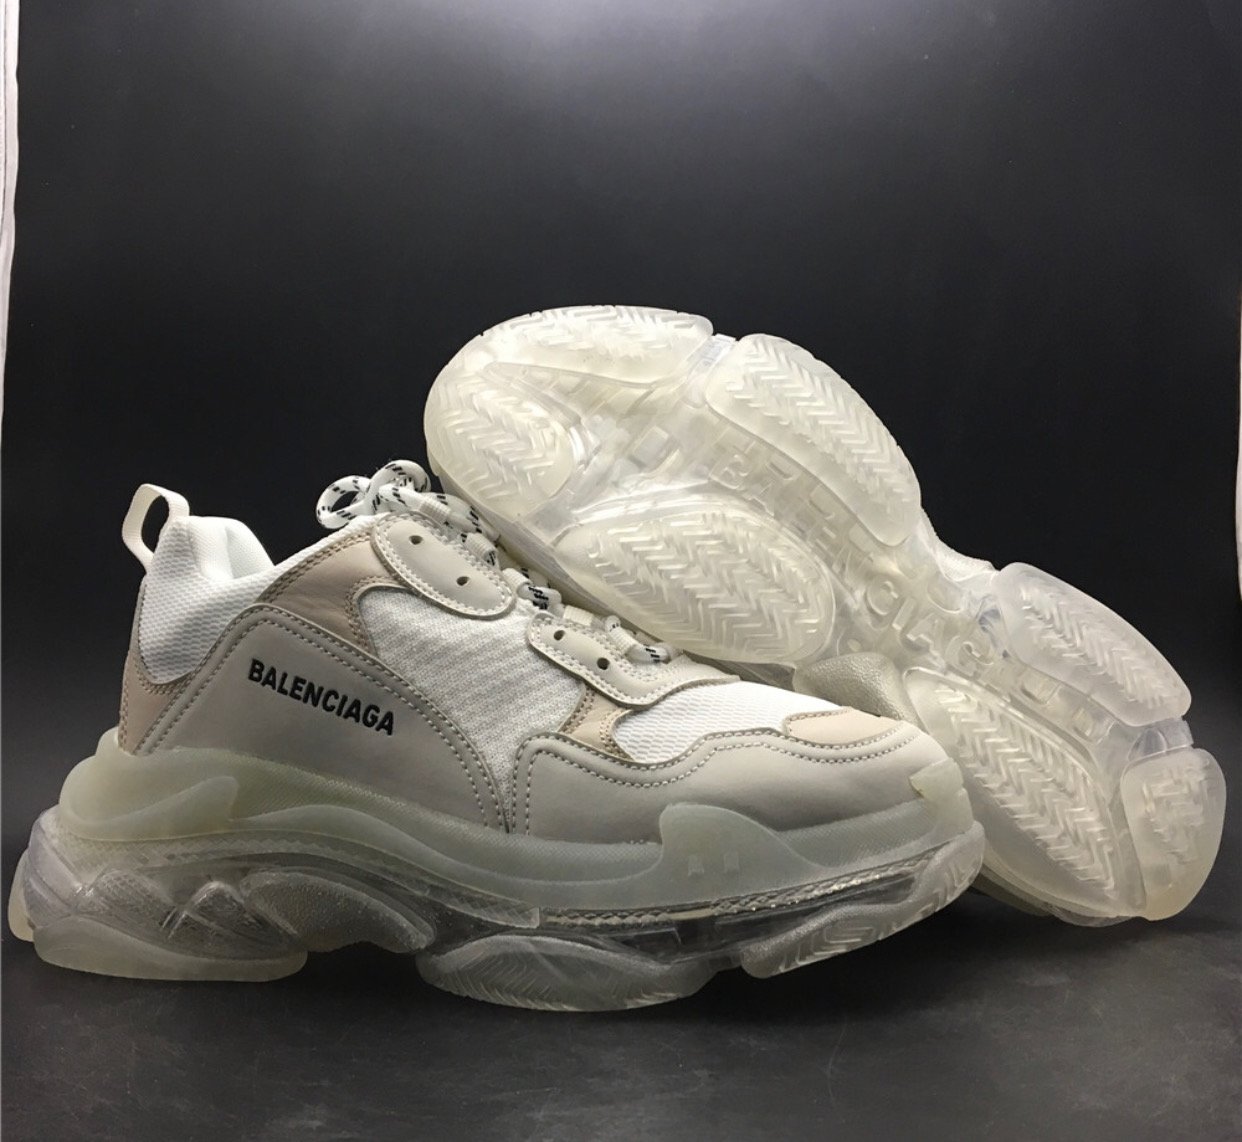 Balenciaga Triple S Outfit Outfits Shoes in 2019 Pinterest